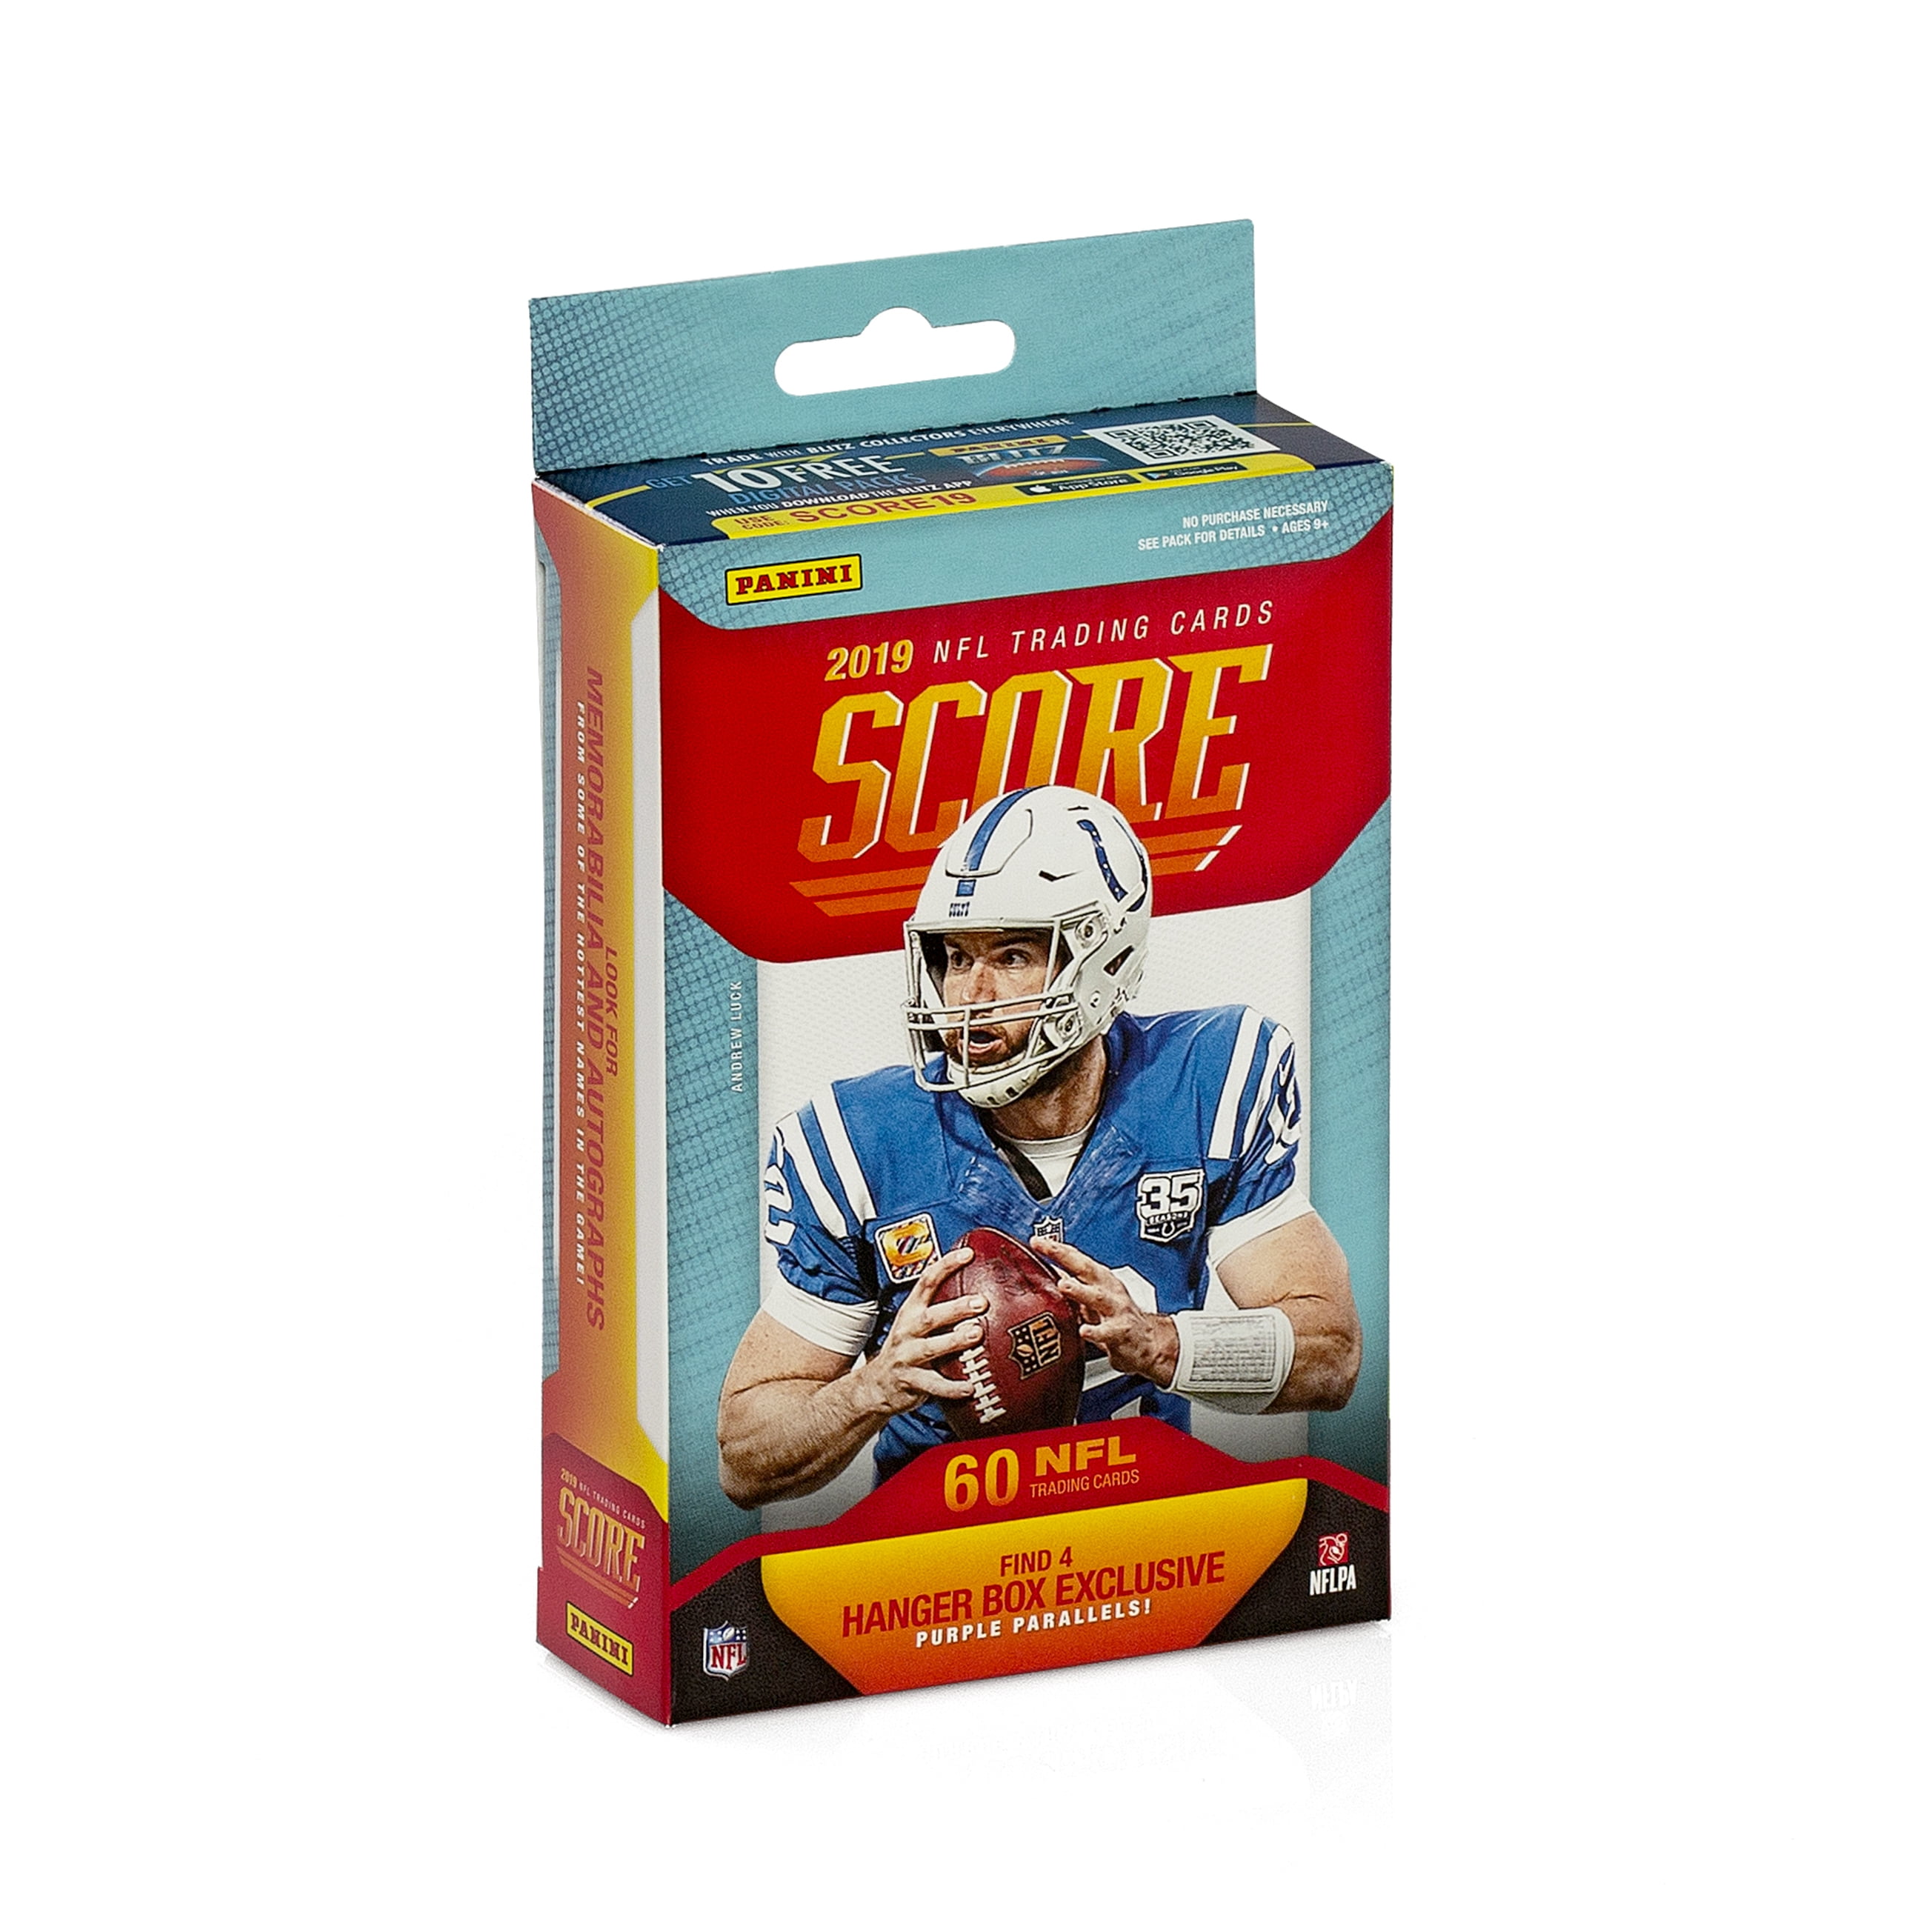 Nfl trading cards